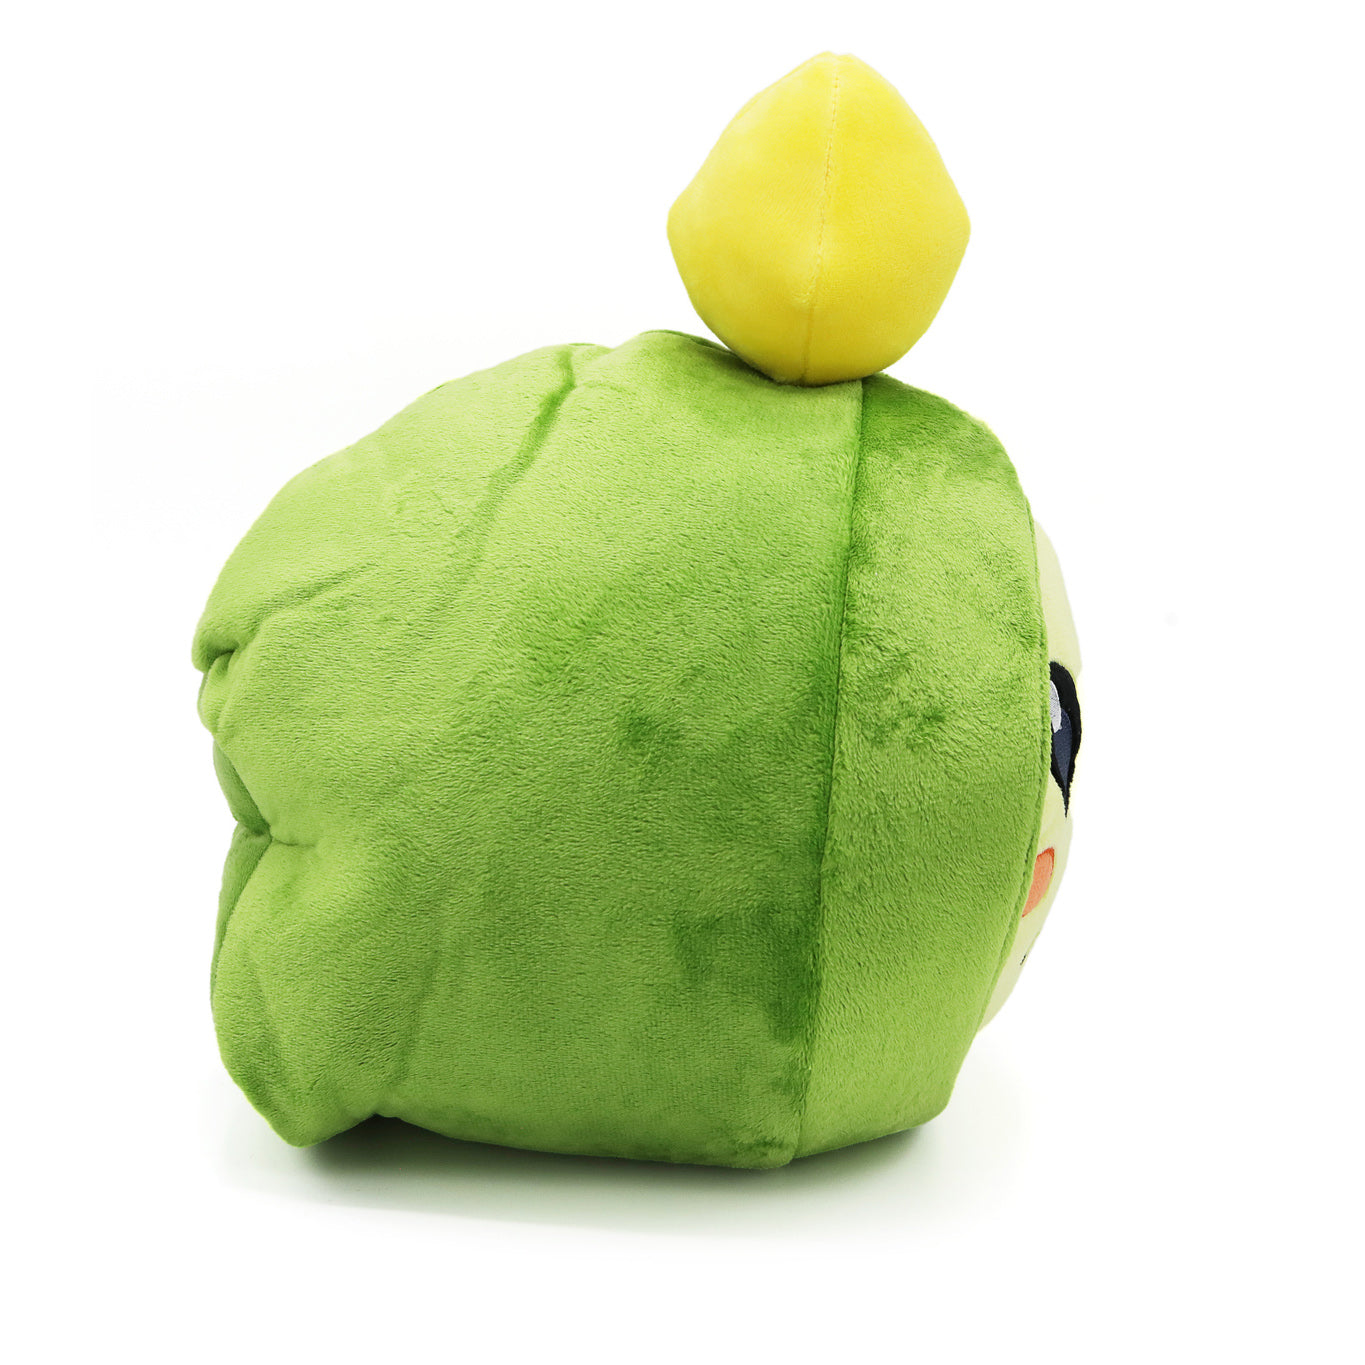 Right side view of green Pilfer Plush.